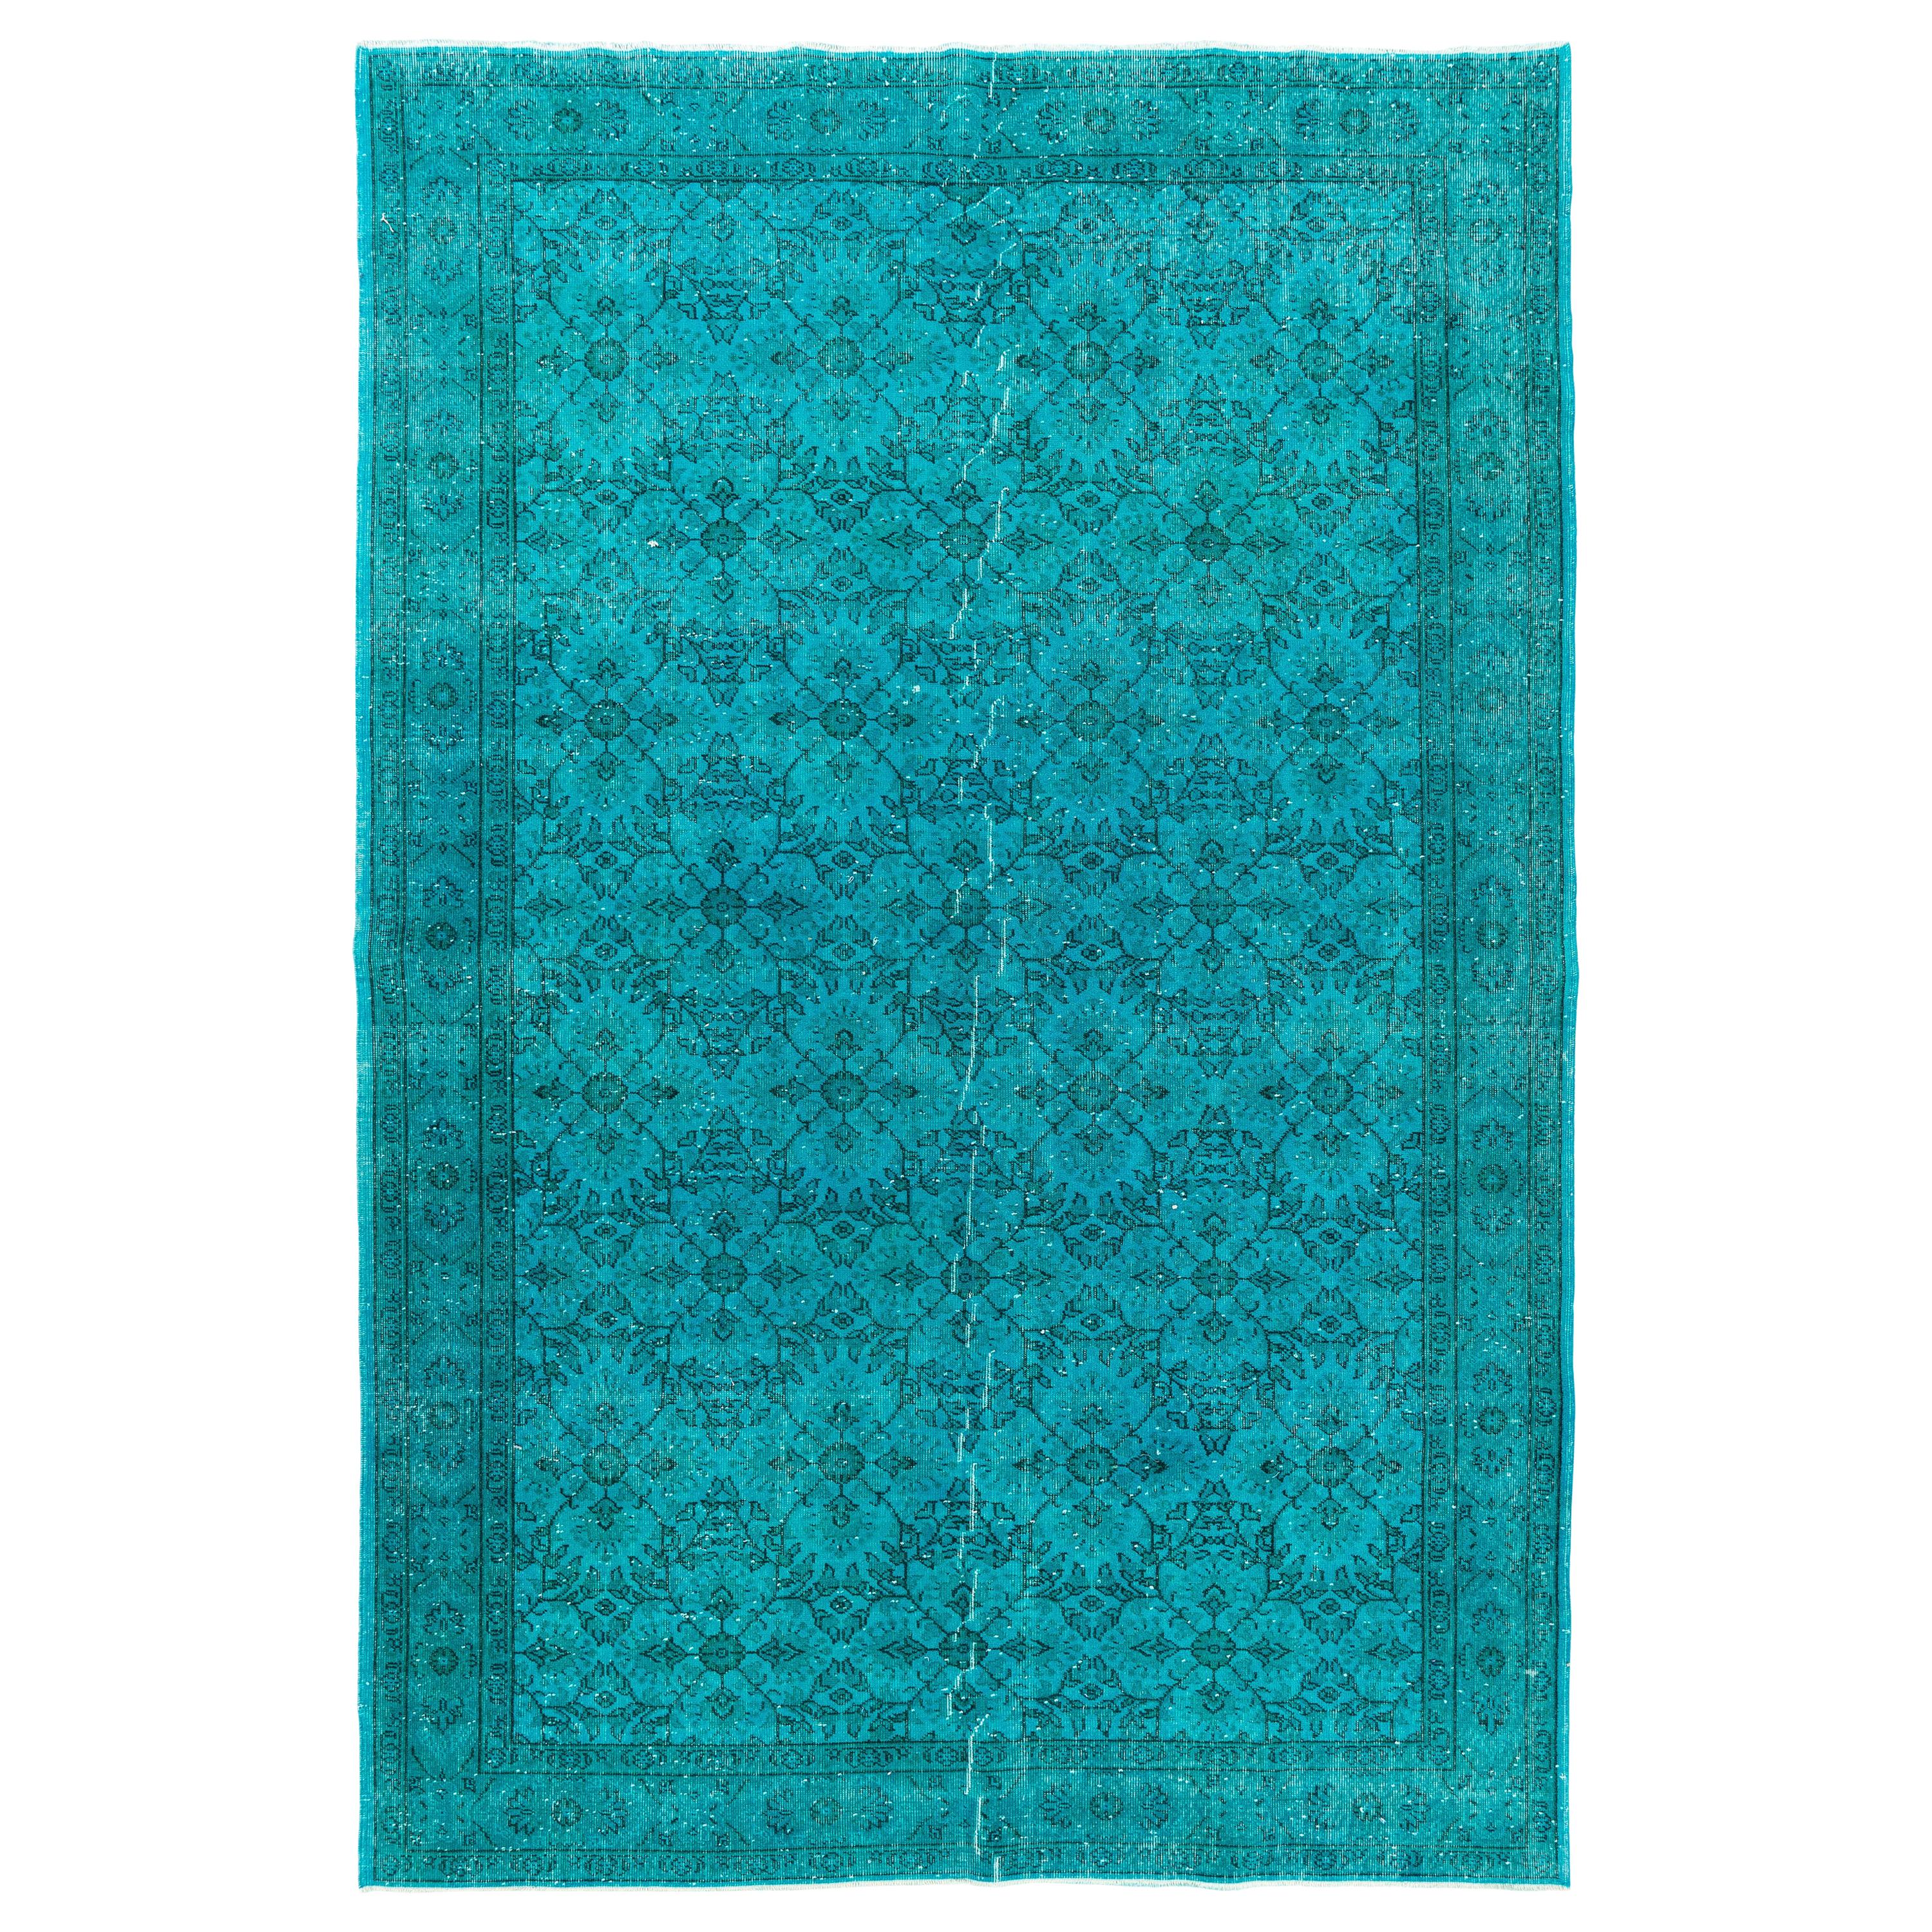 Vintage Floral Design Anatolian Rug, Overdyed in Teal Color